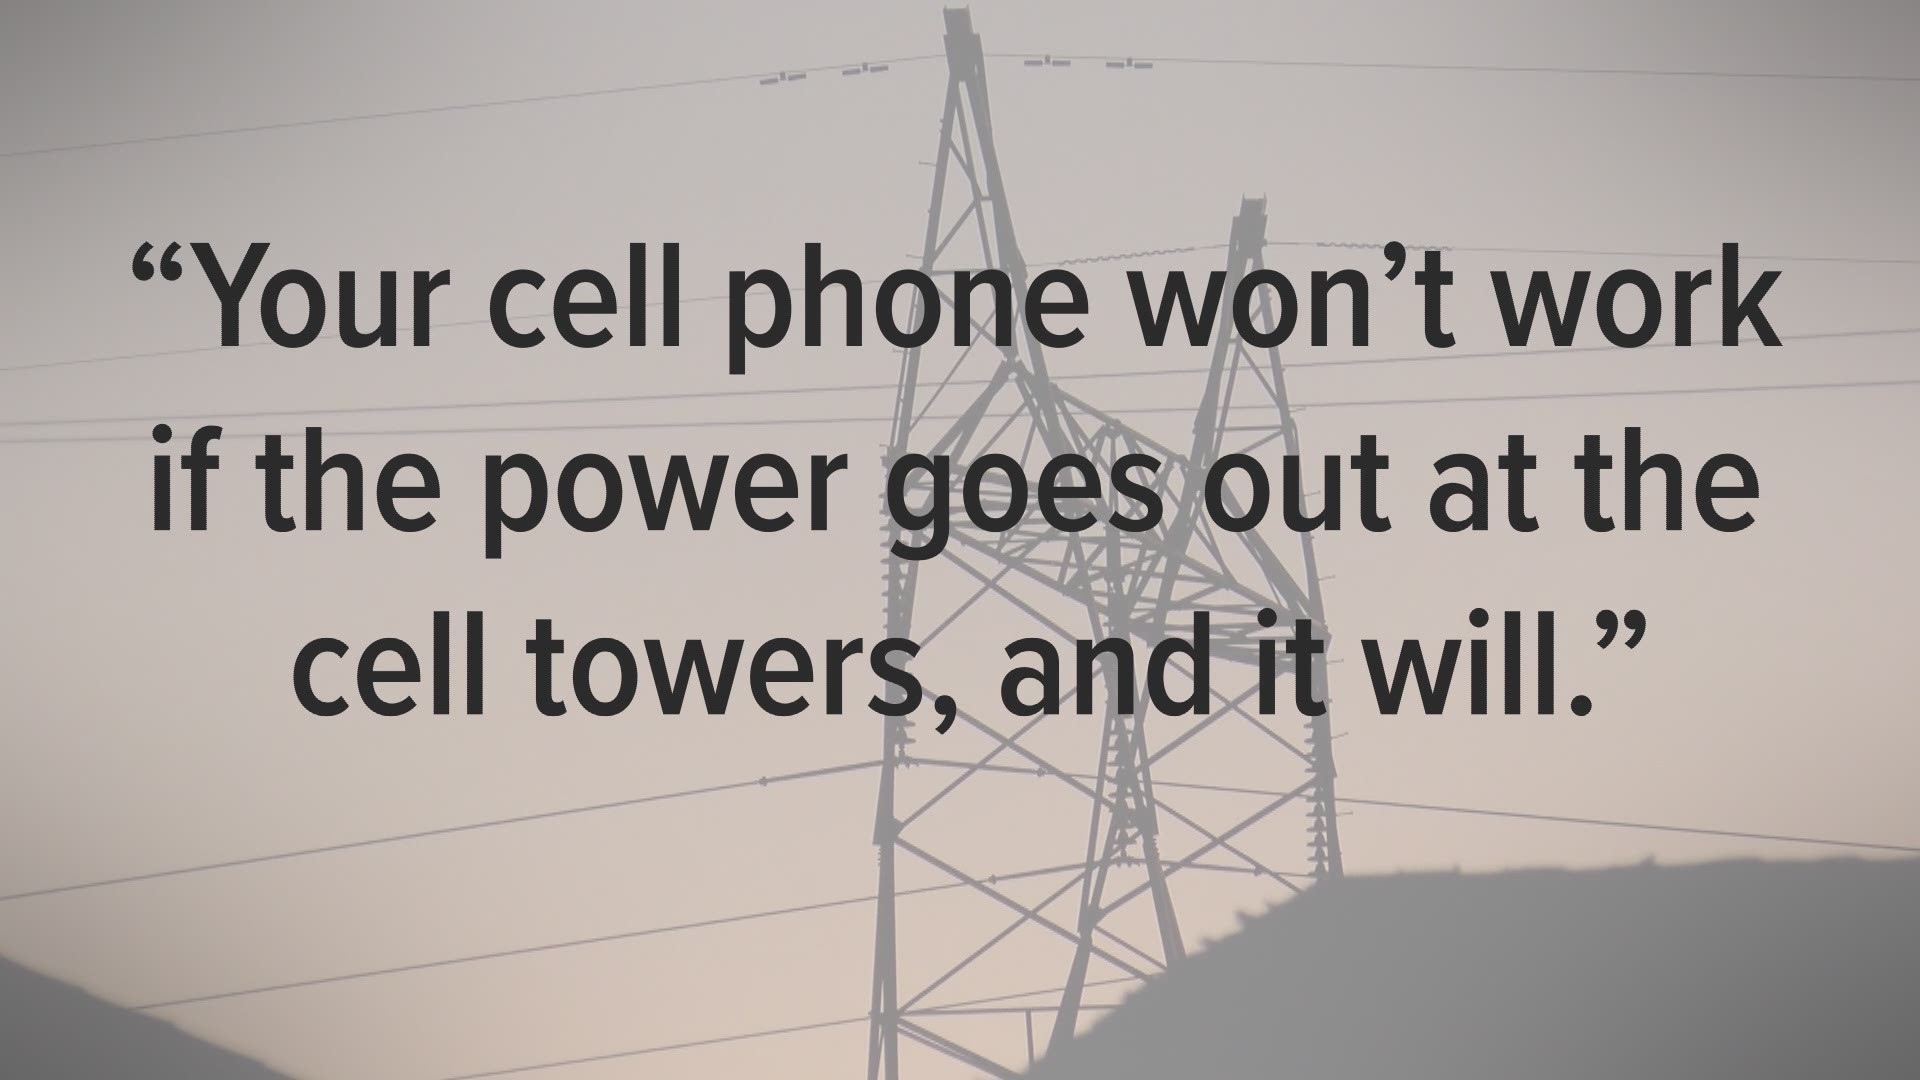 While it may seem logical that no power equals no cell service, the reality is that cell providers have taken steps to keep service up.